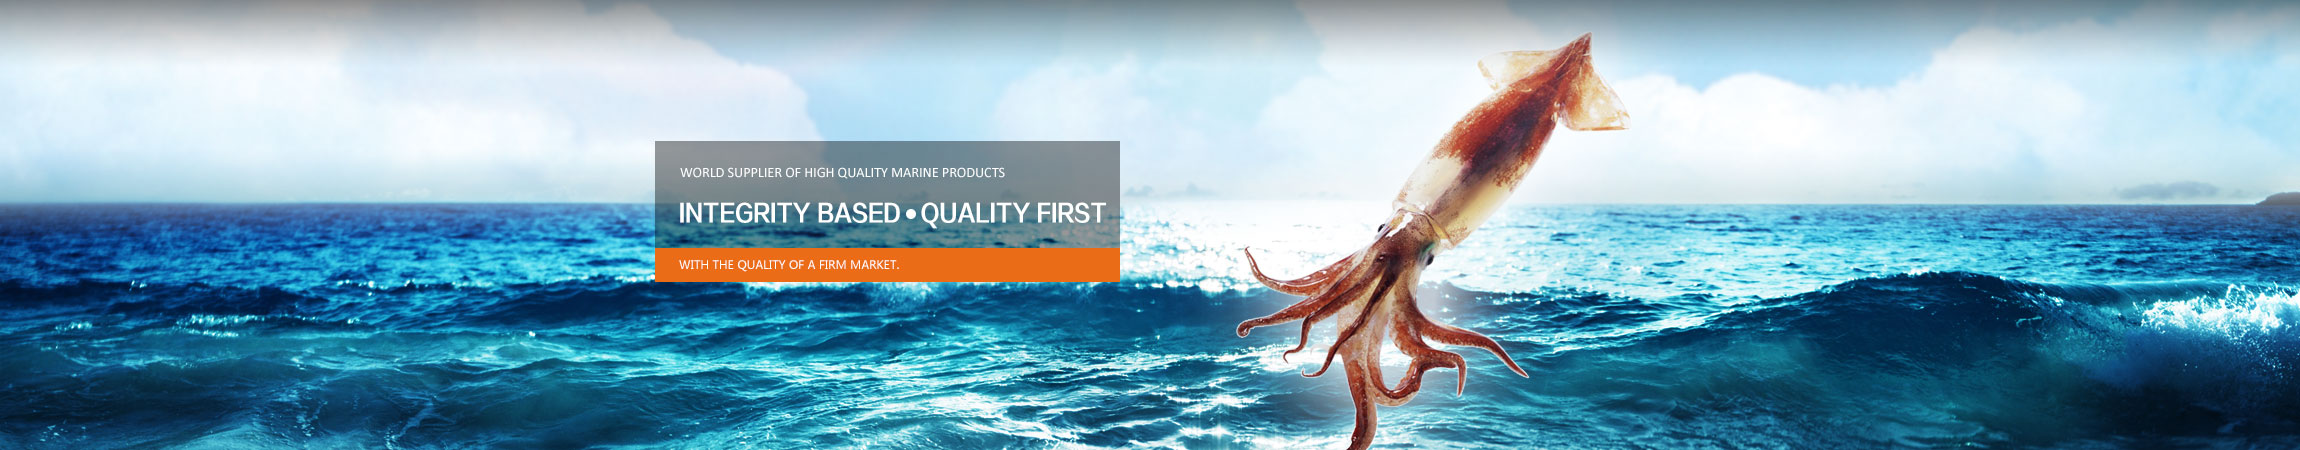 Squid,China Manufacturers, China Suppliers, Products Made in China